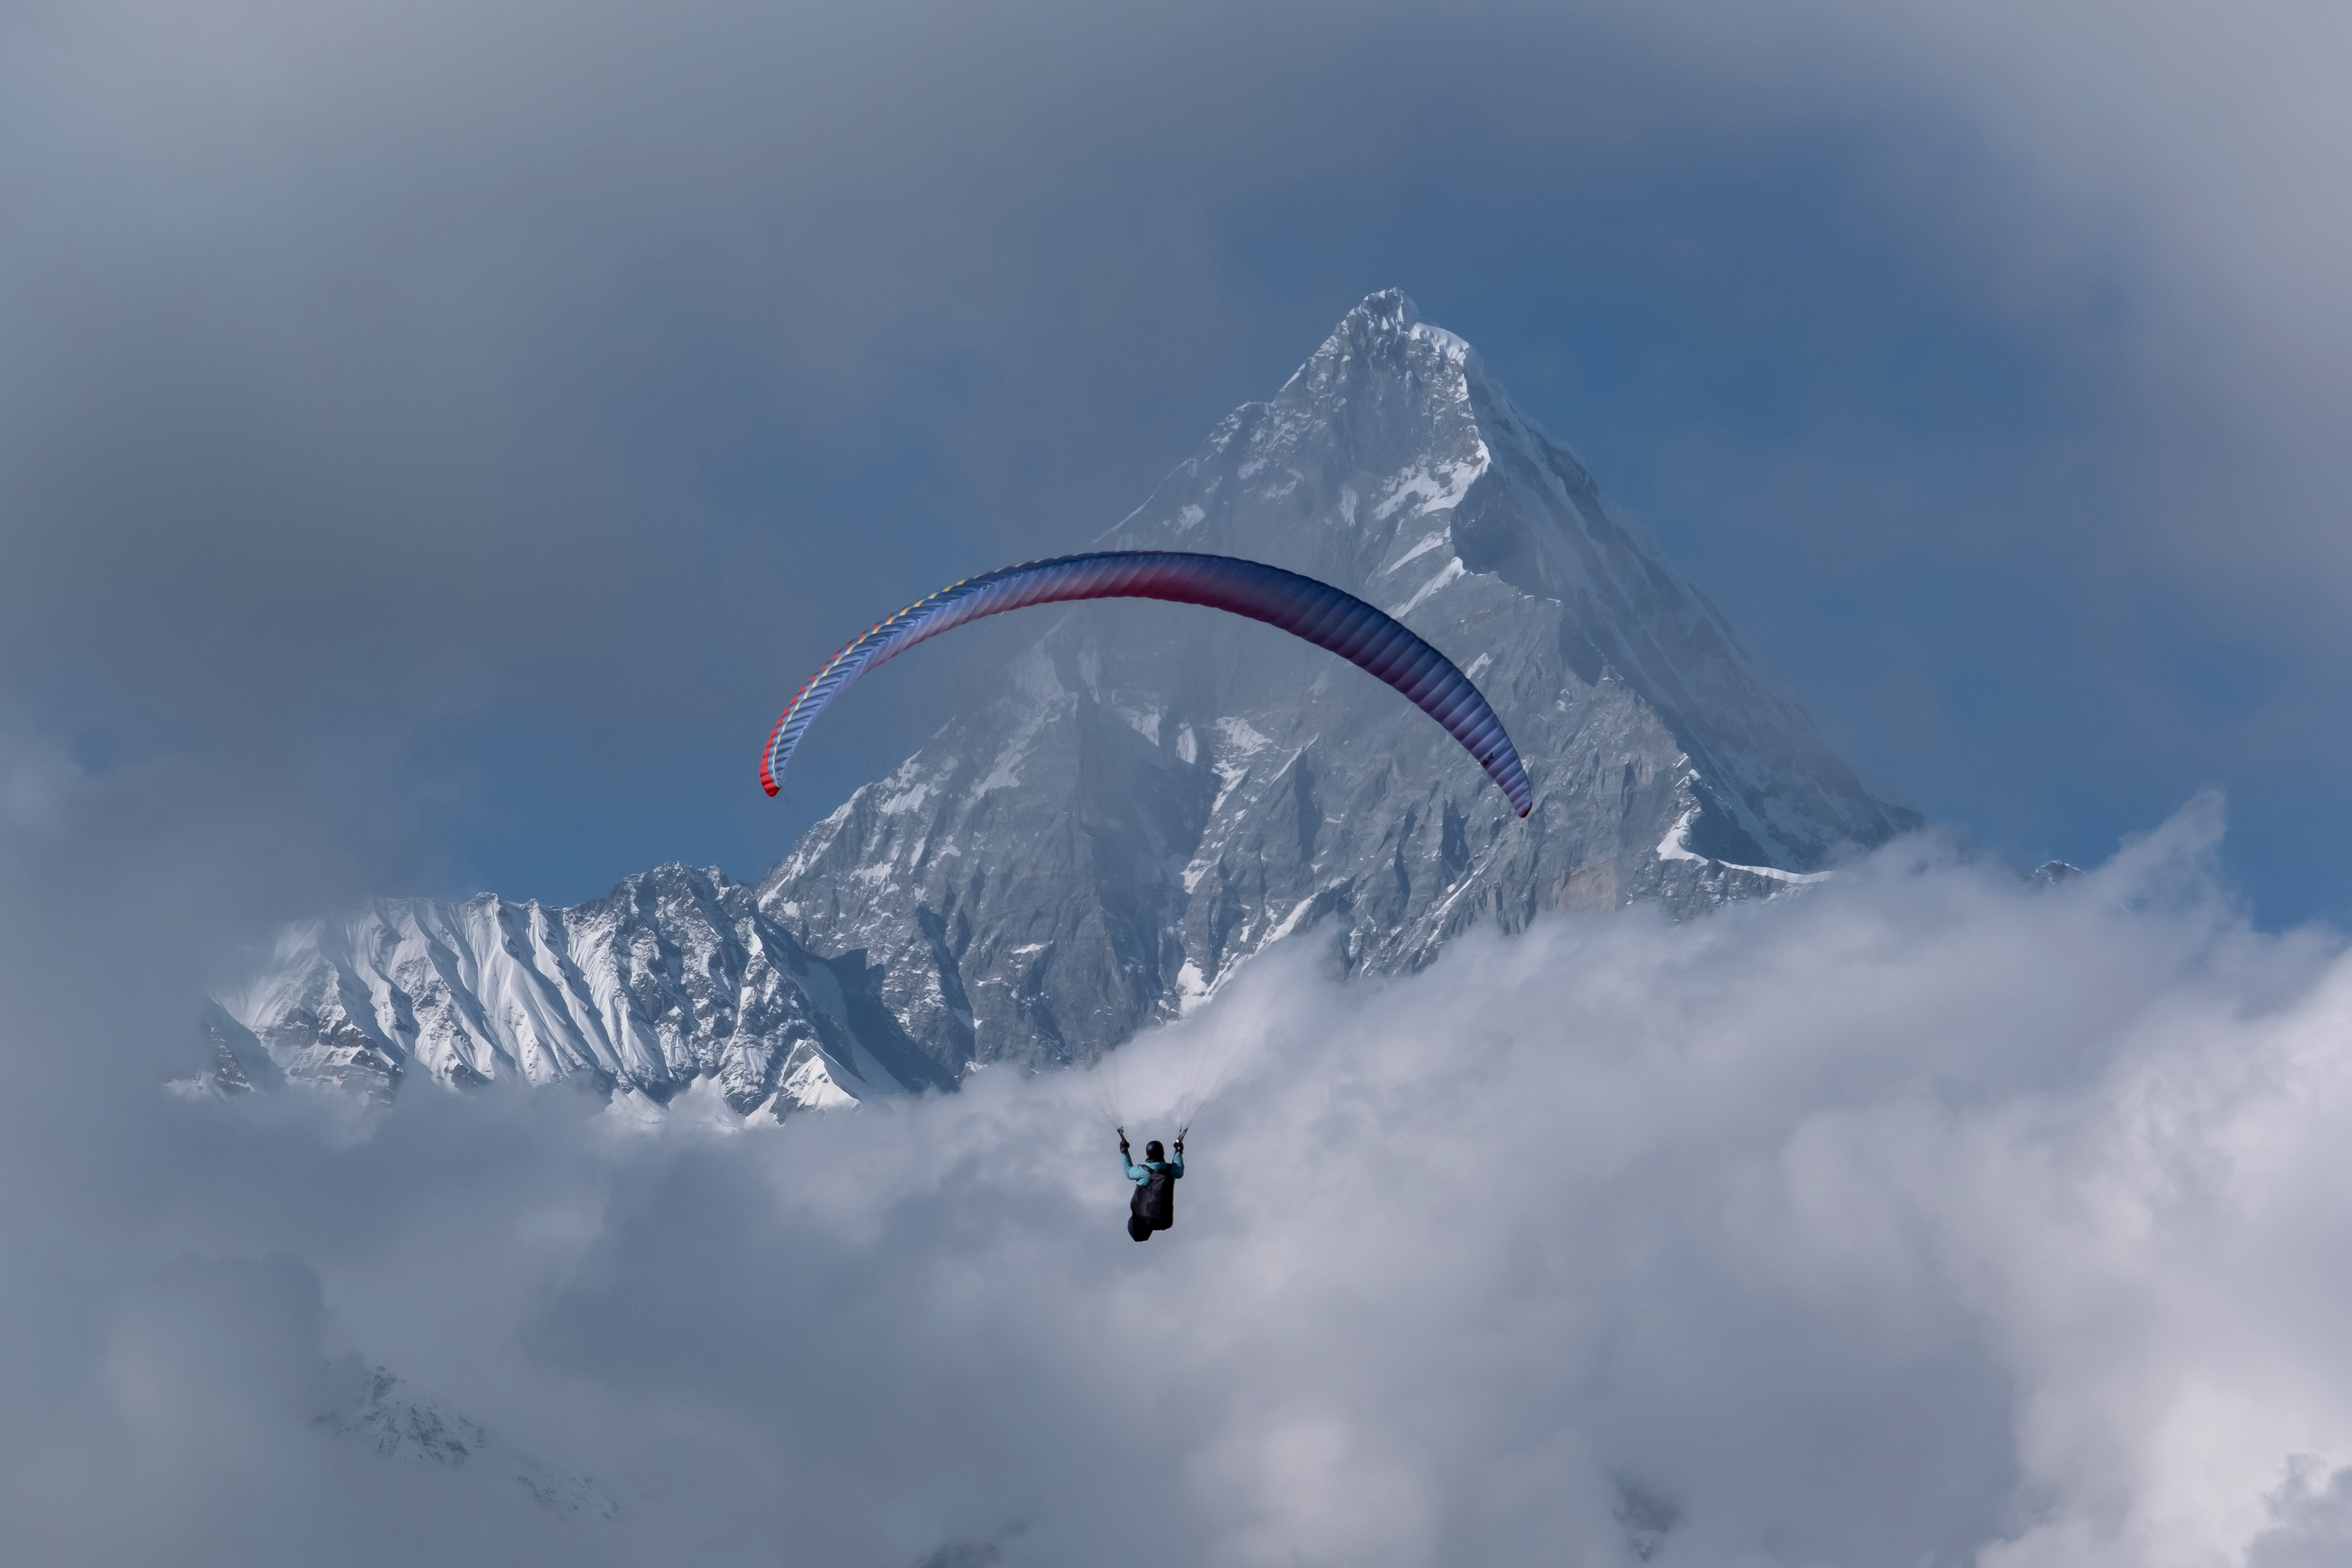 Paraglide Ozone Swift 6 face to the Machapuchare